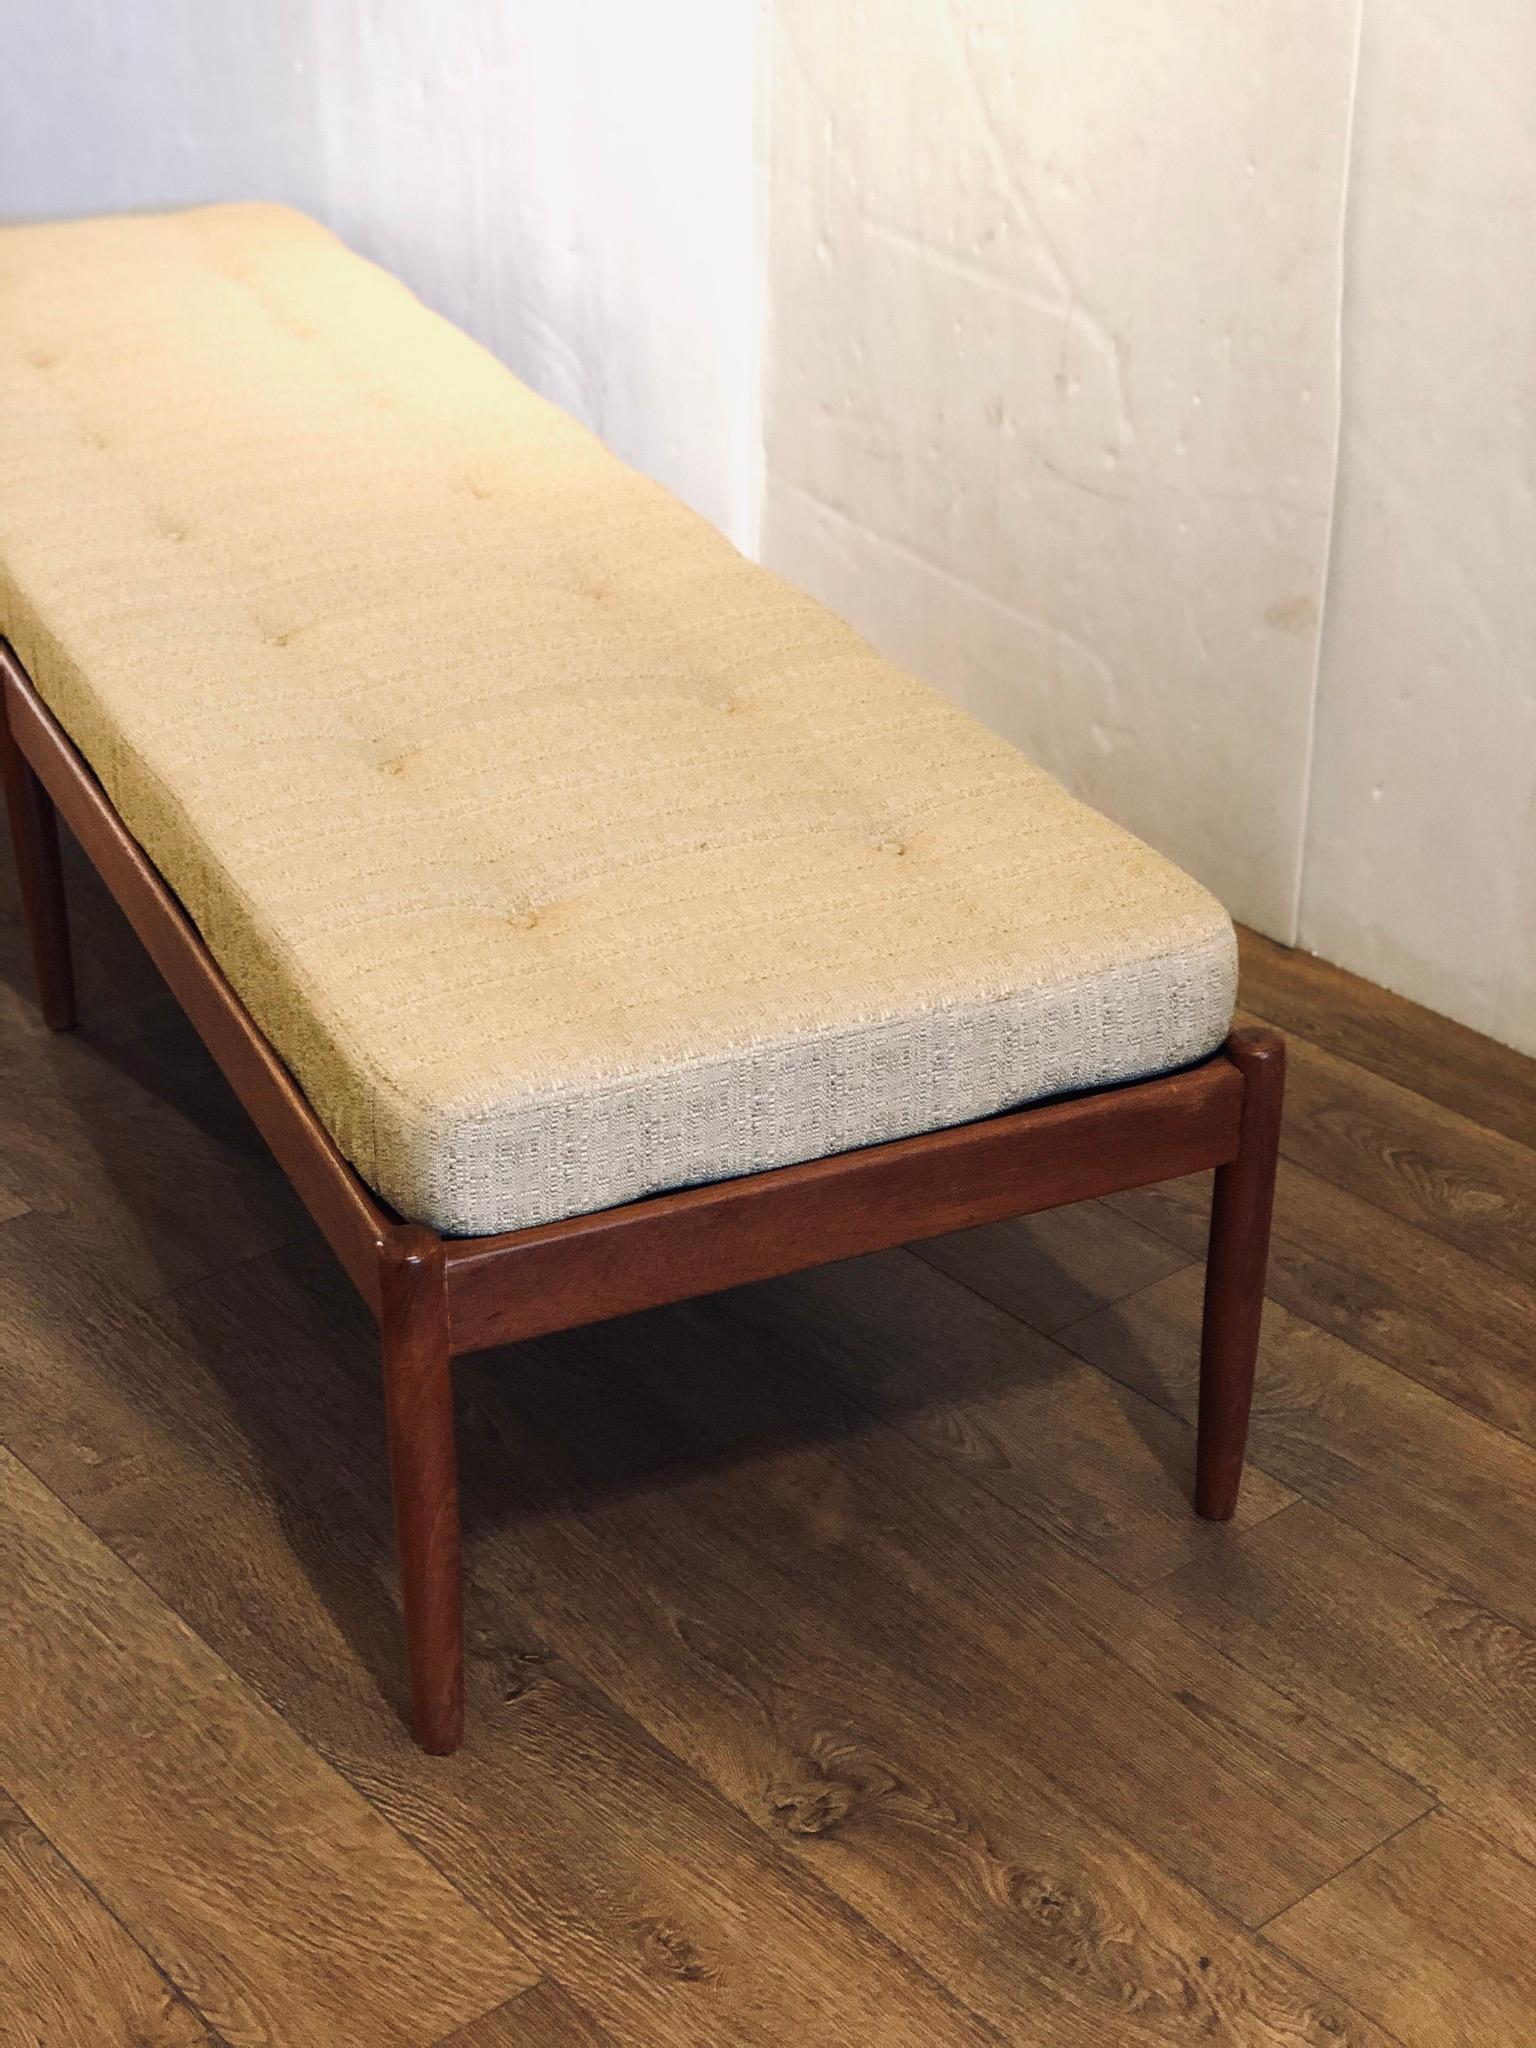 A beautiful solid walnut extra large bench, freshly refinished and reupholstered in gold fabric, a great piece to put in front of your bed along a wall, etc.